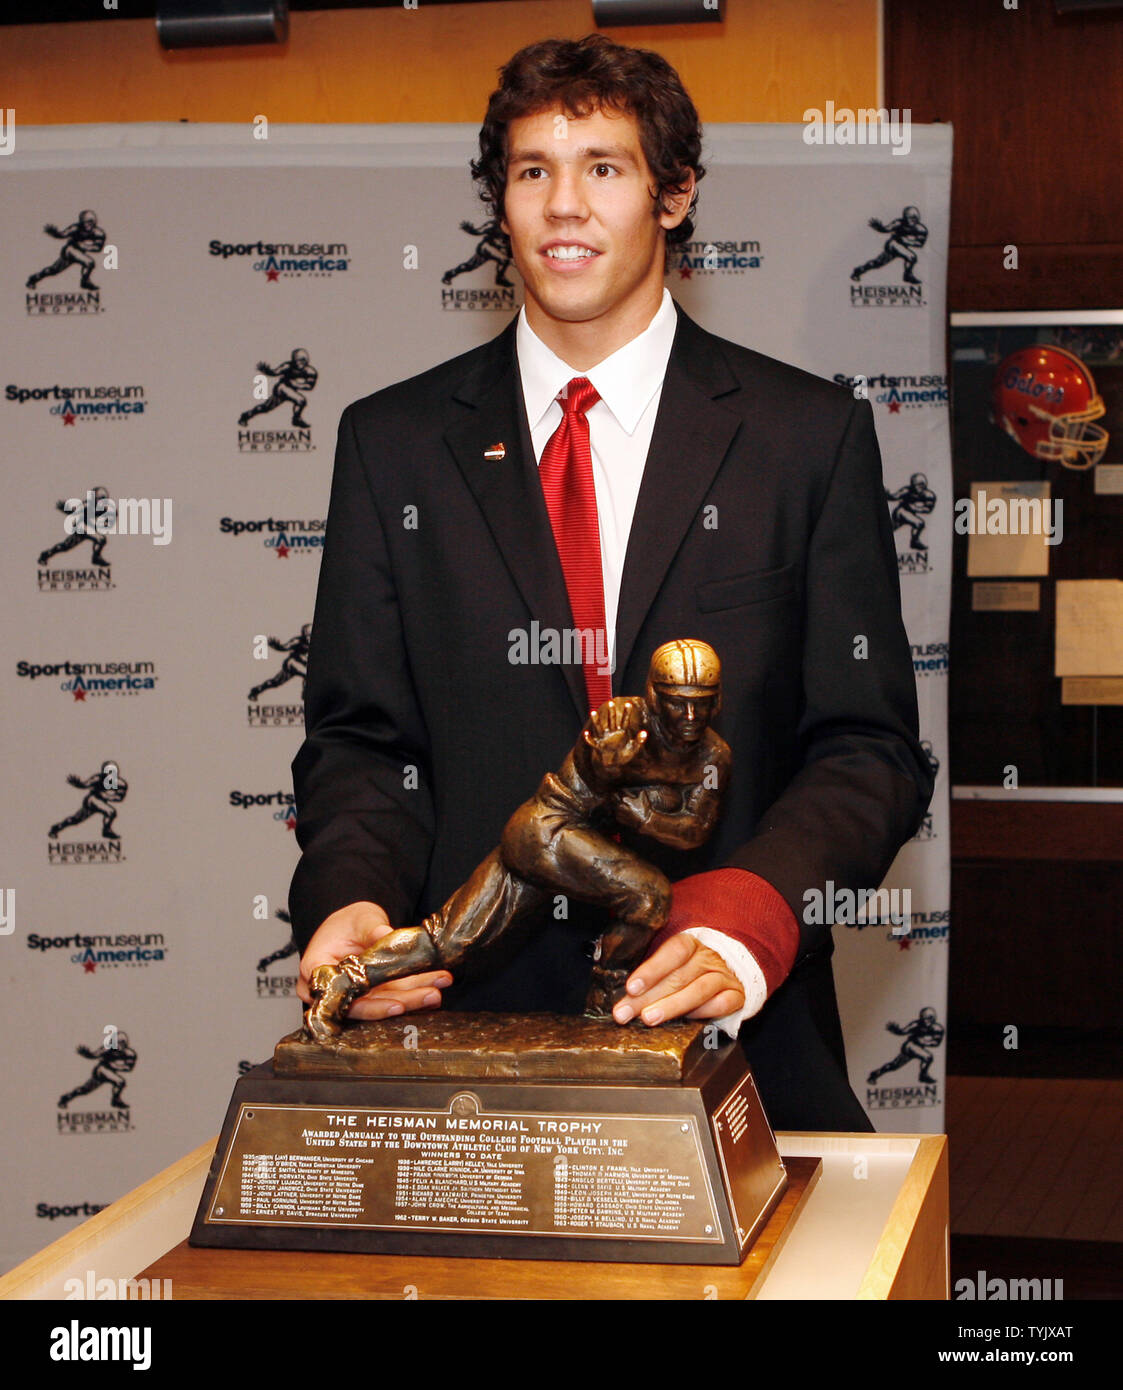 Sam Bradford of the University of Oklahoma stands with the Heisman Trophy at the Sports Museum of America in New York City on December 13, 2008.                                        (UPI Photo/John Angelillo)   . Stock Photo